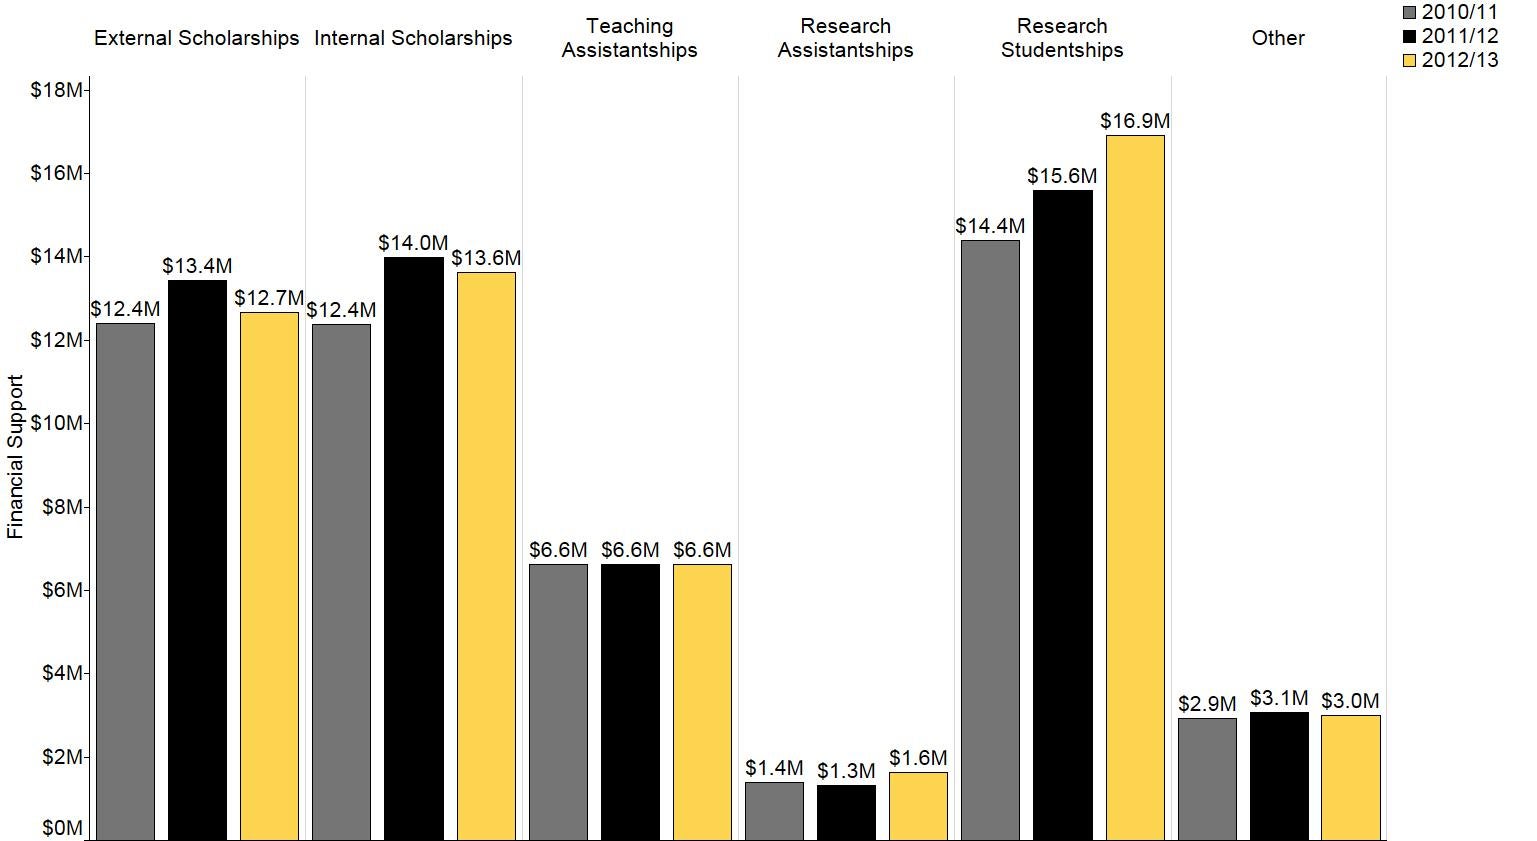 This figure shows the dollar amount of financial support to PhD students between 2010 and 2013 by source. Research studentships support has increased while other categories remain consistent. Data for this figure are in the Data Table section below.